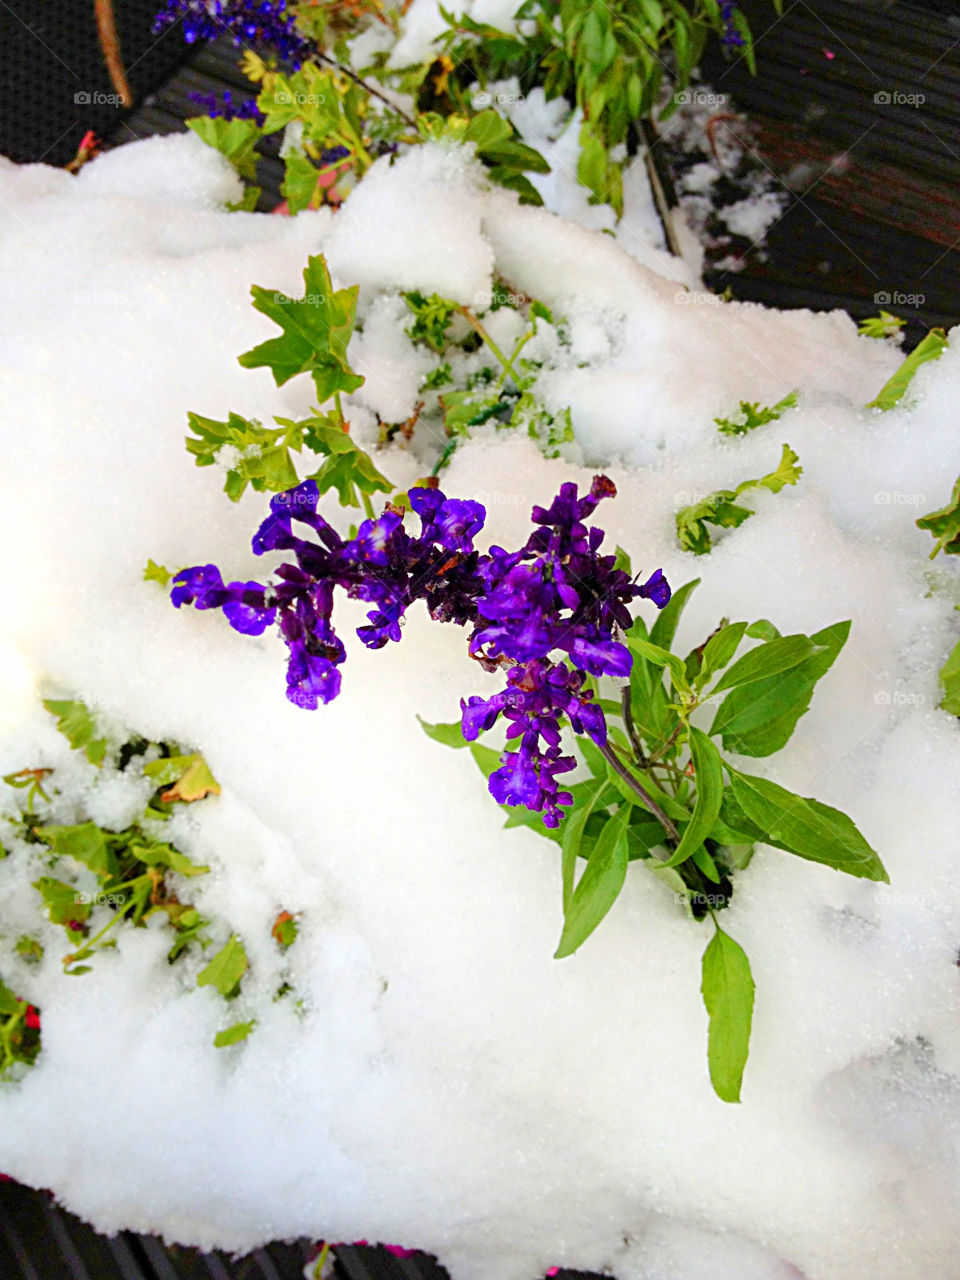 snow flowers and first by swisstraveler